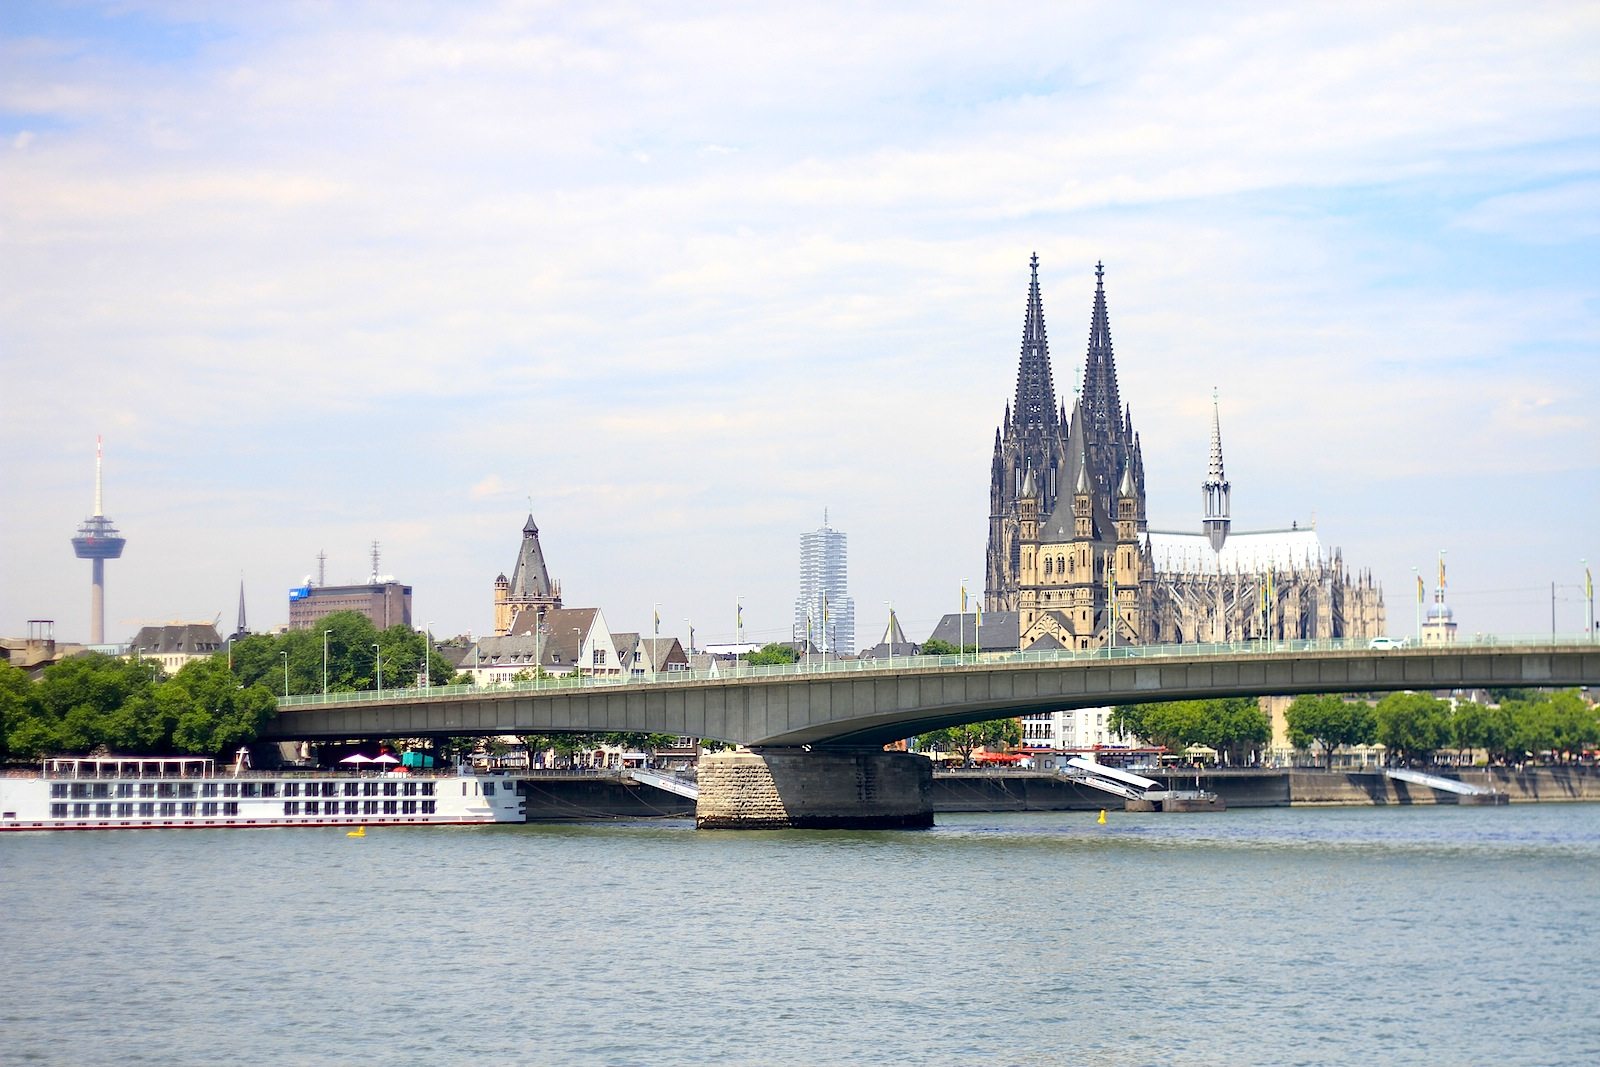 Altstadt of Cologne. Deutzer Brücke with the Cathedral (Dom), Cologne Tower (KölnTurm), town hall, WDR, TV tower Colonius.